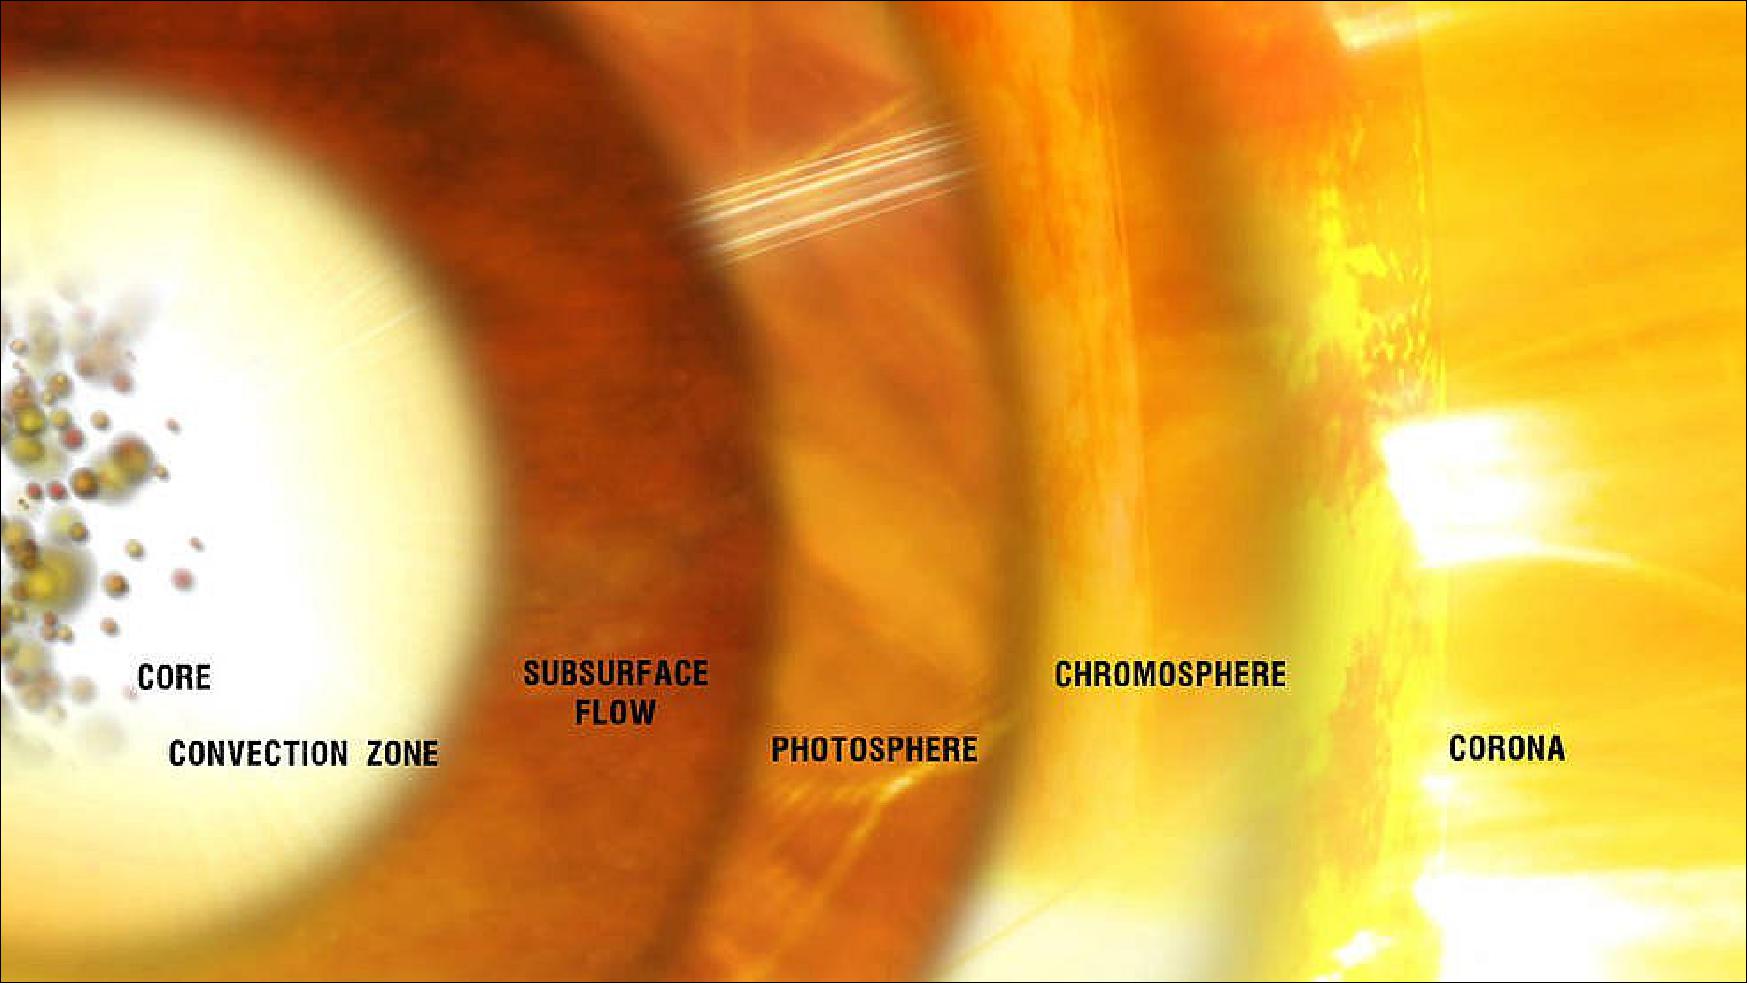 Figure 8: The chromosphere lies between the photosphere, or bright surface of the Sun that emits visible light, and the super-heated corona, or outer atmosphere of the Sun at the source of solar eruptions. The chromosphere is a key link between these two regions and a missing variable determining the Sun’s magnetic structure (image credit: NASA’s Goddard Space Flight Center)